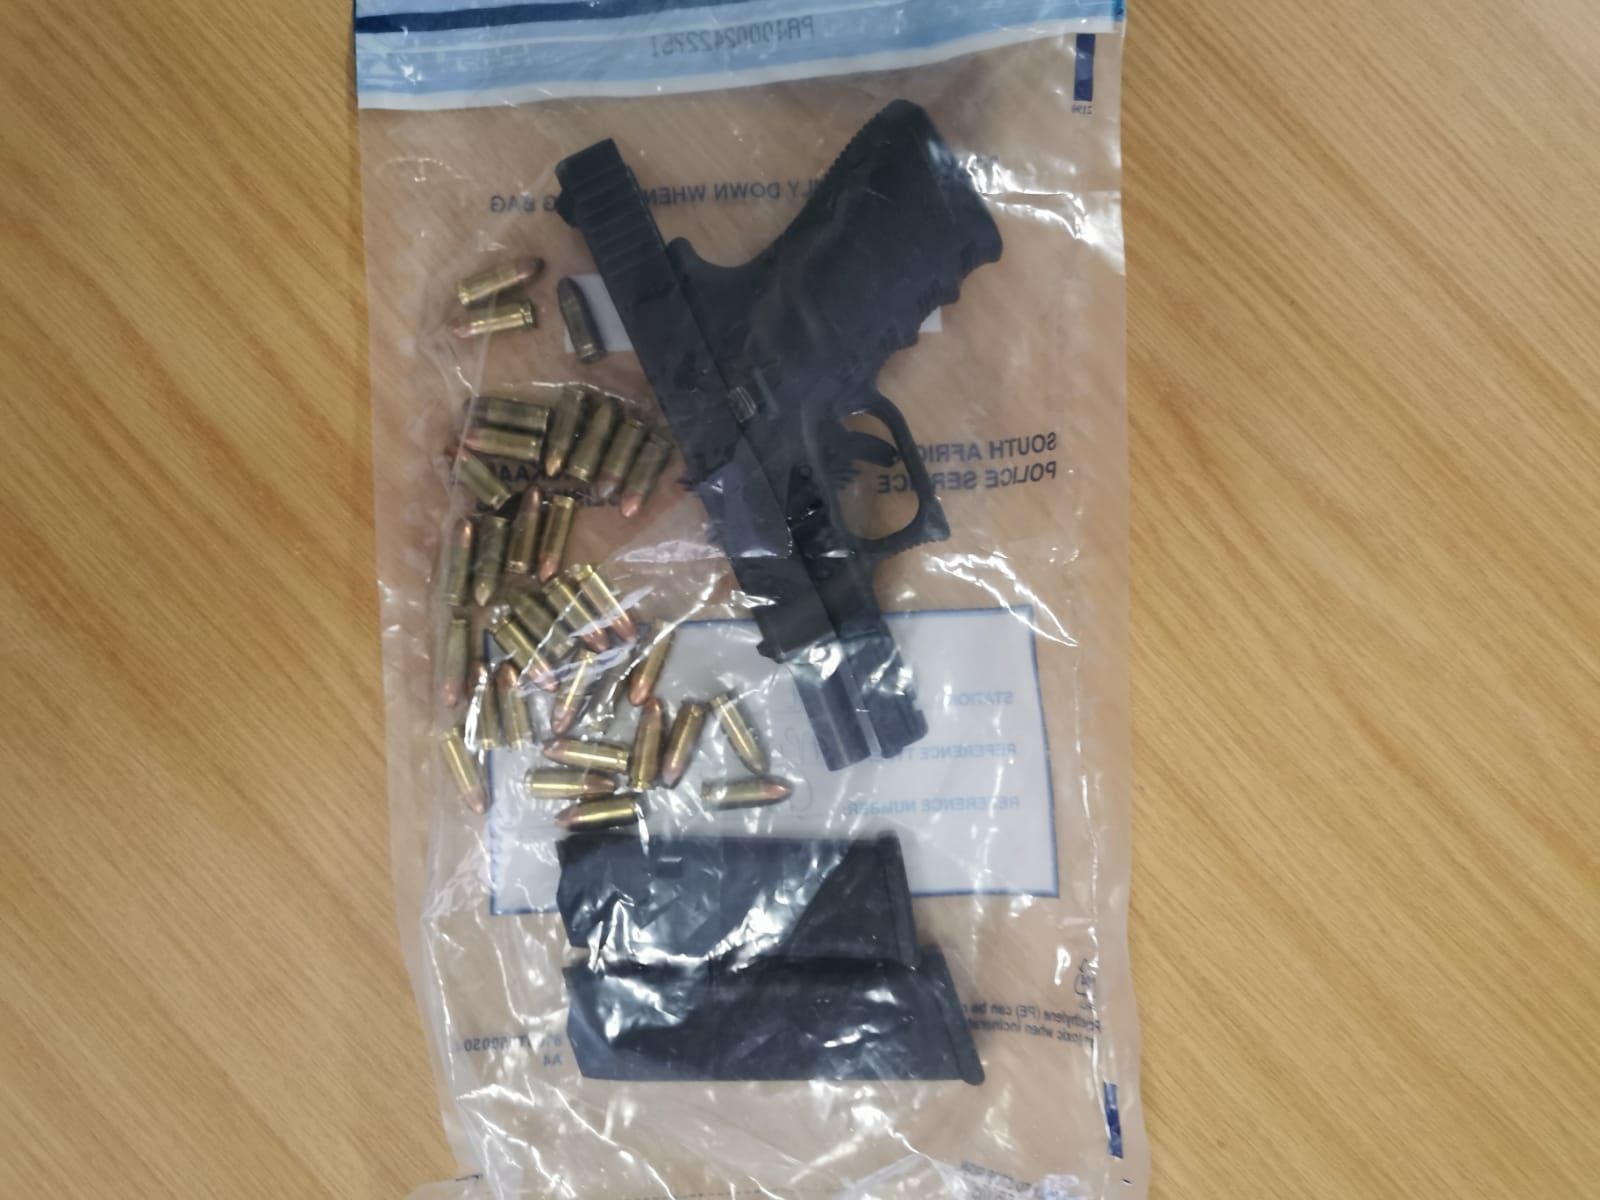 Large quantity of firearms and ammunition seized during crime prevention operations